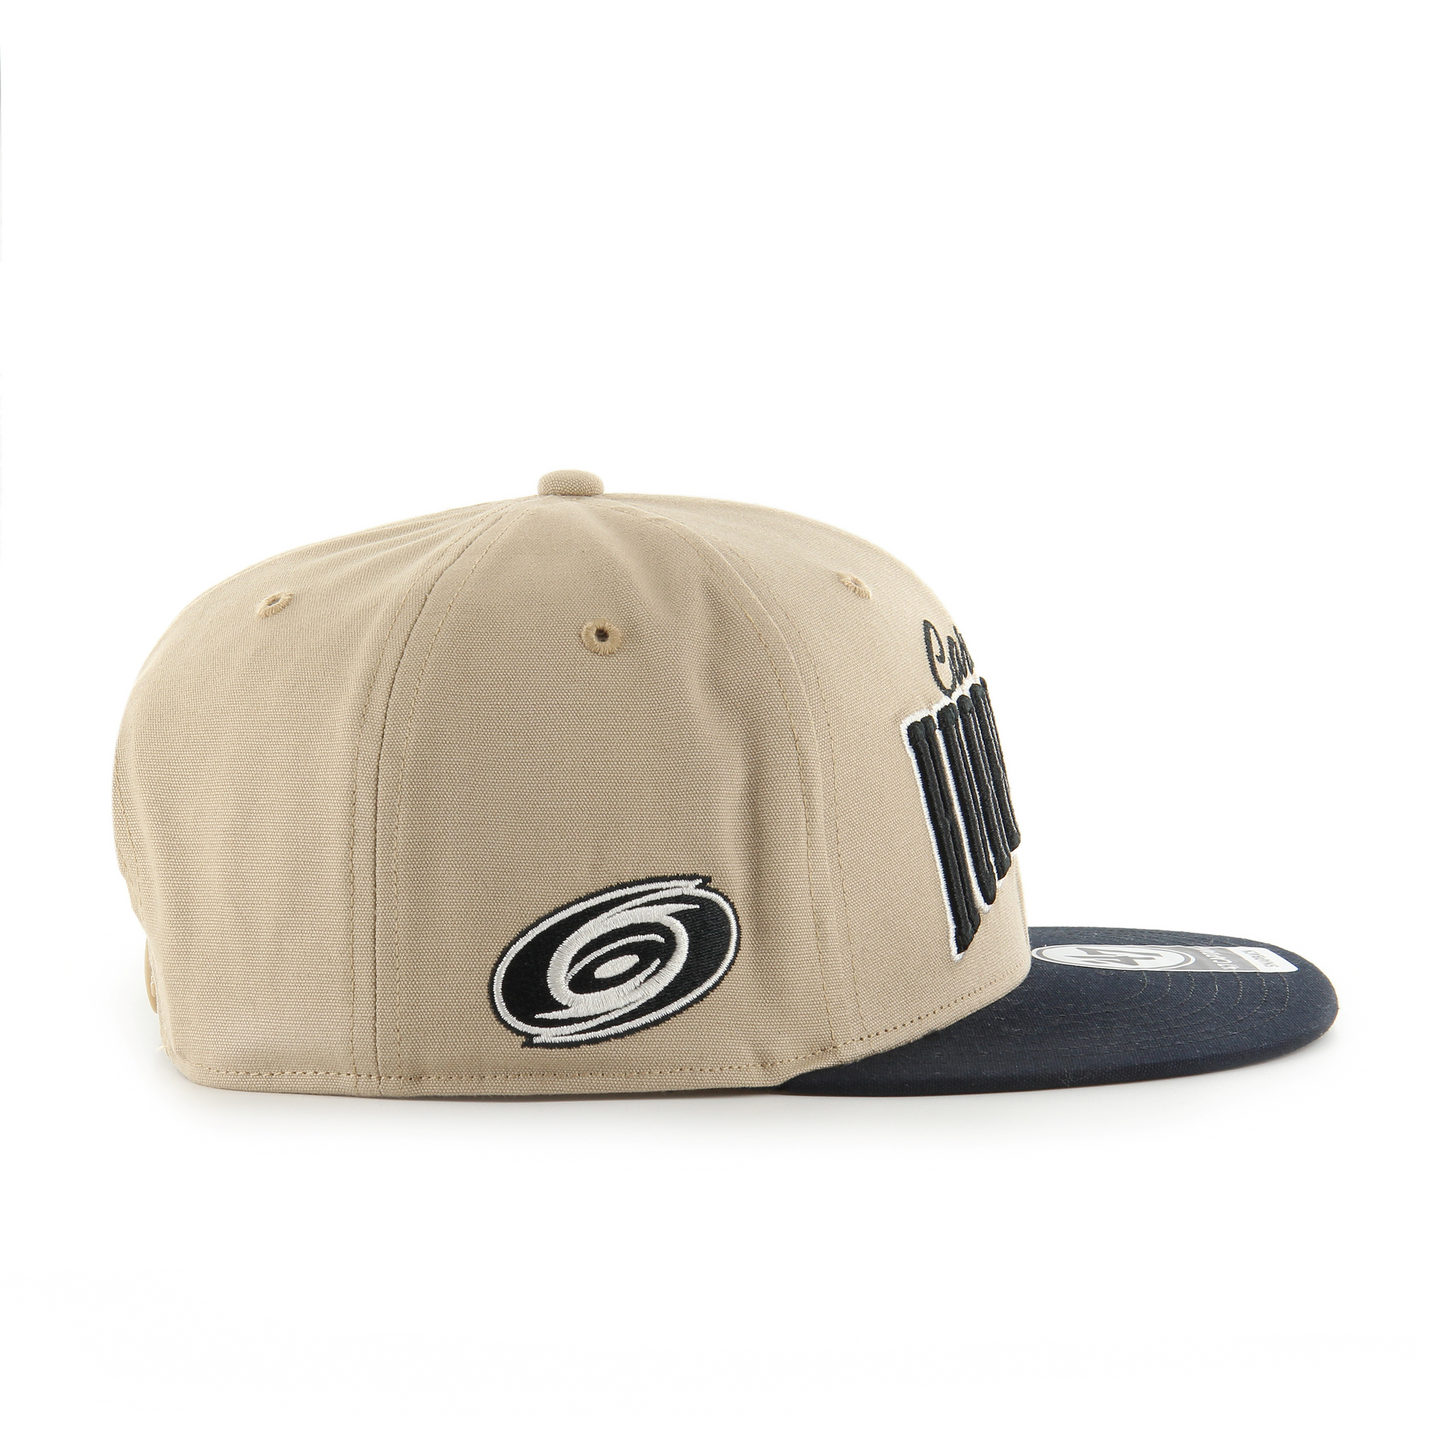 Side: Tan Snapback with black brim and Black and white primary logo on side